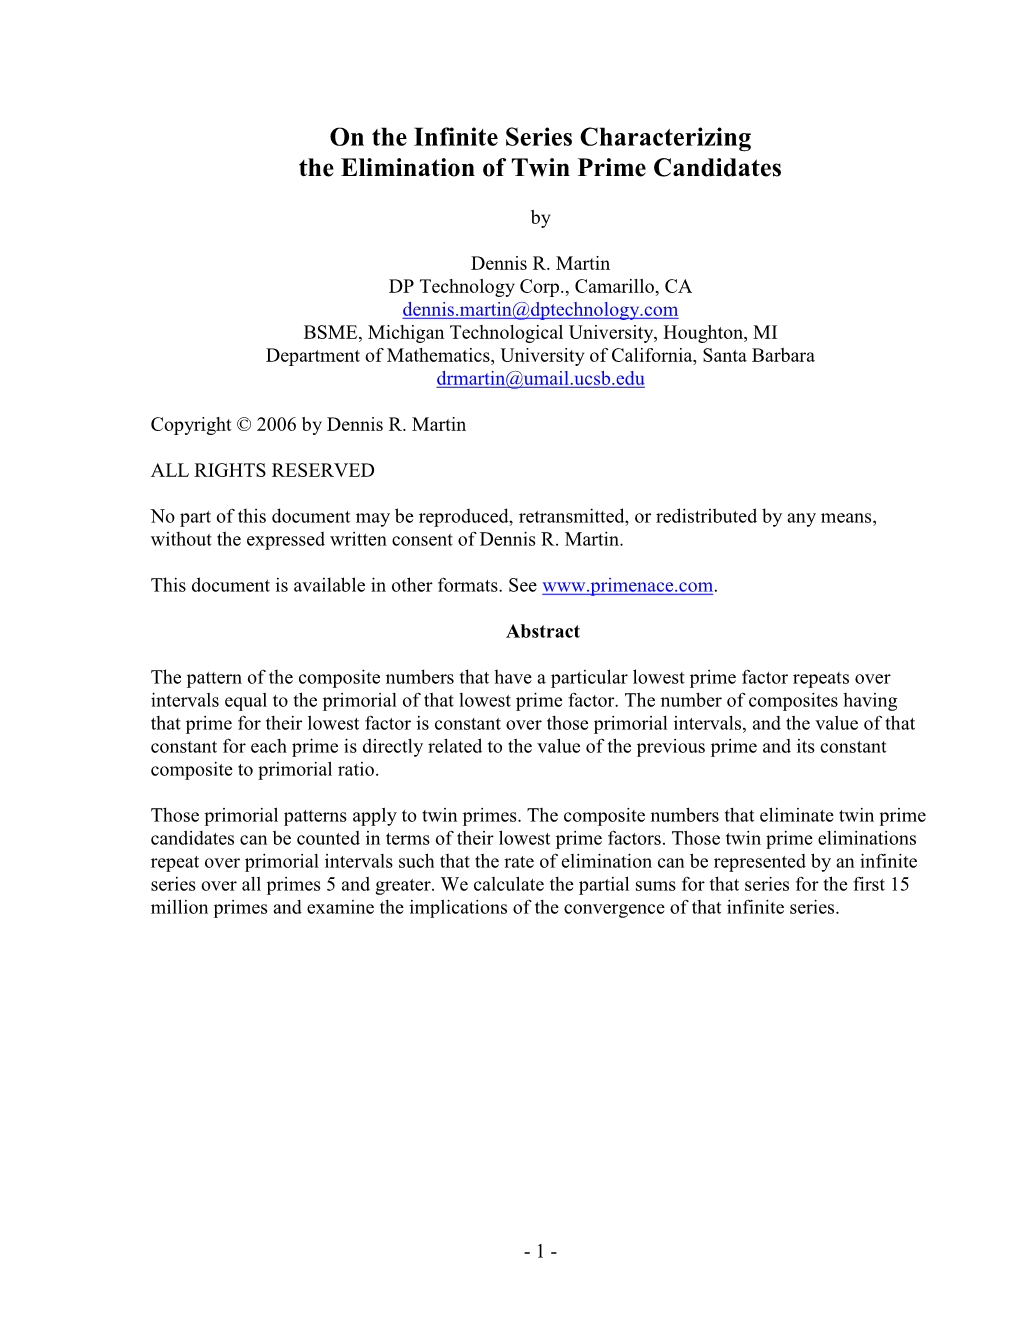 On the Infinite Series Characterizing the Elimination of Twin Prime Candidates